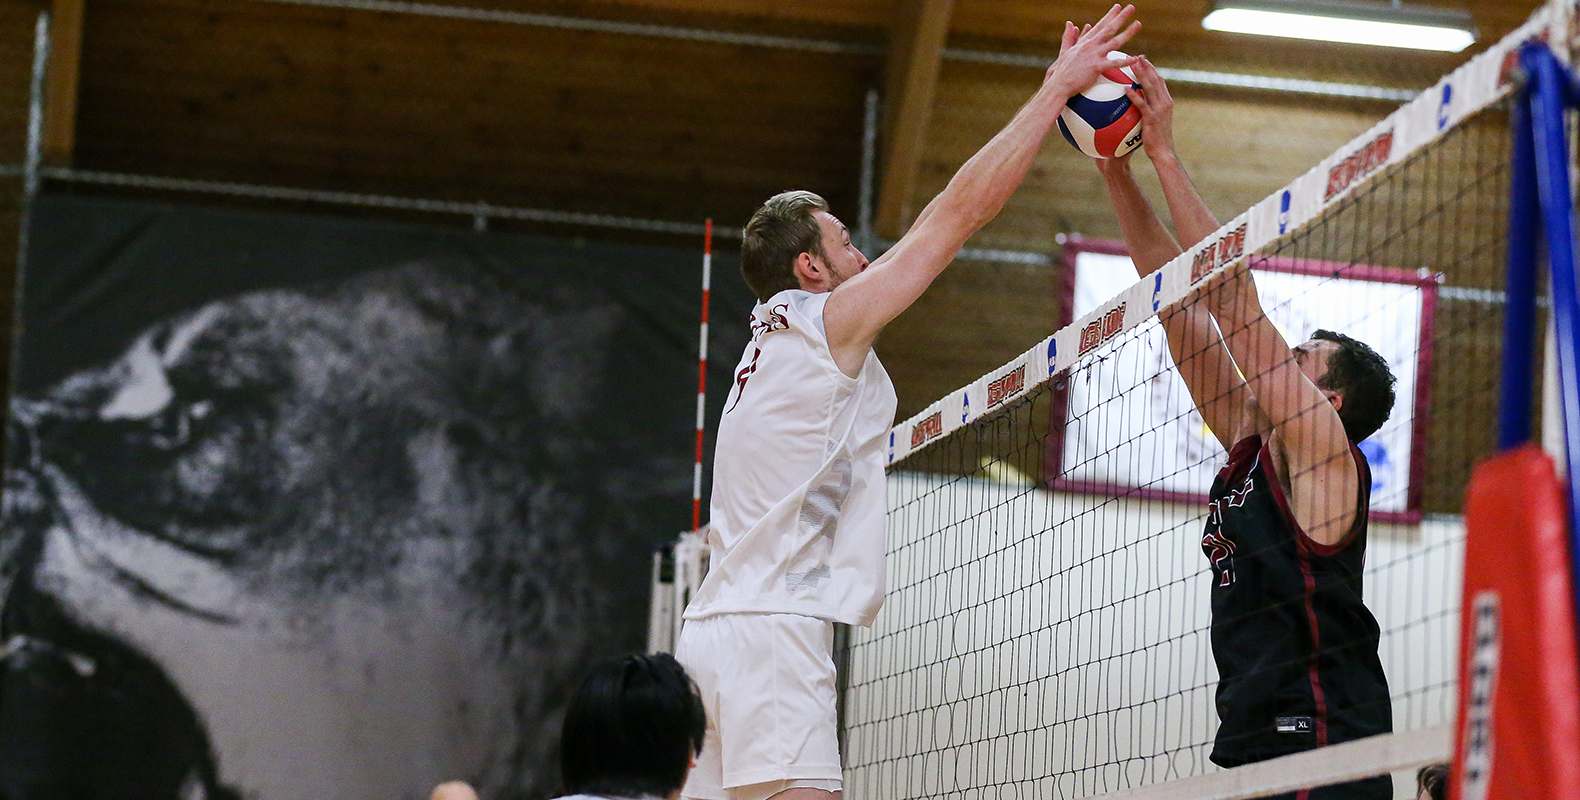 Regis Men’s Volleyball Earns First Win of 2022, 3-1